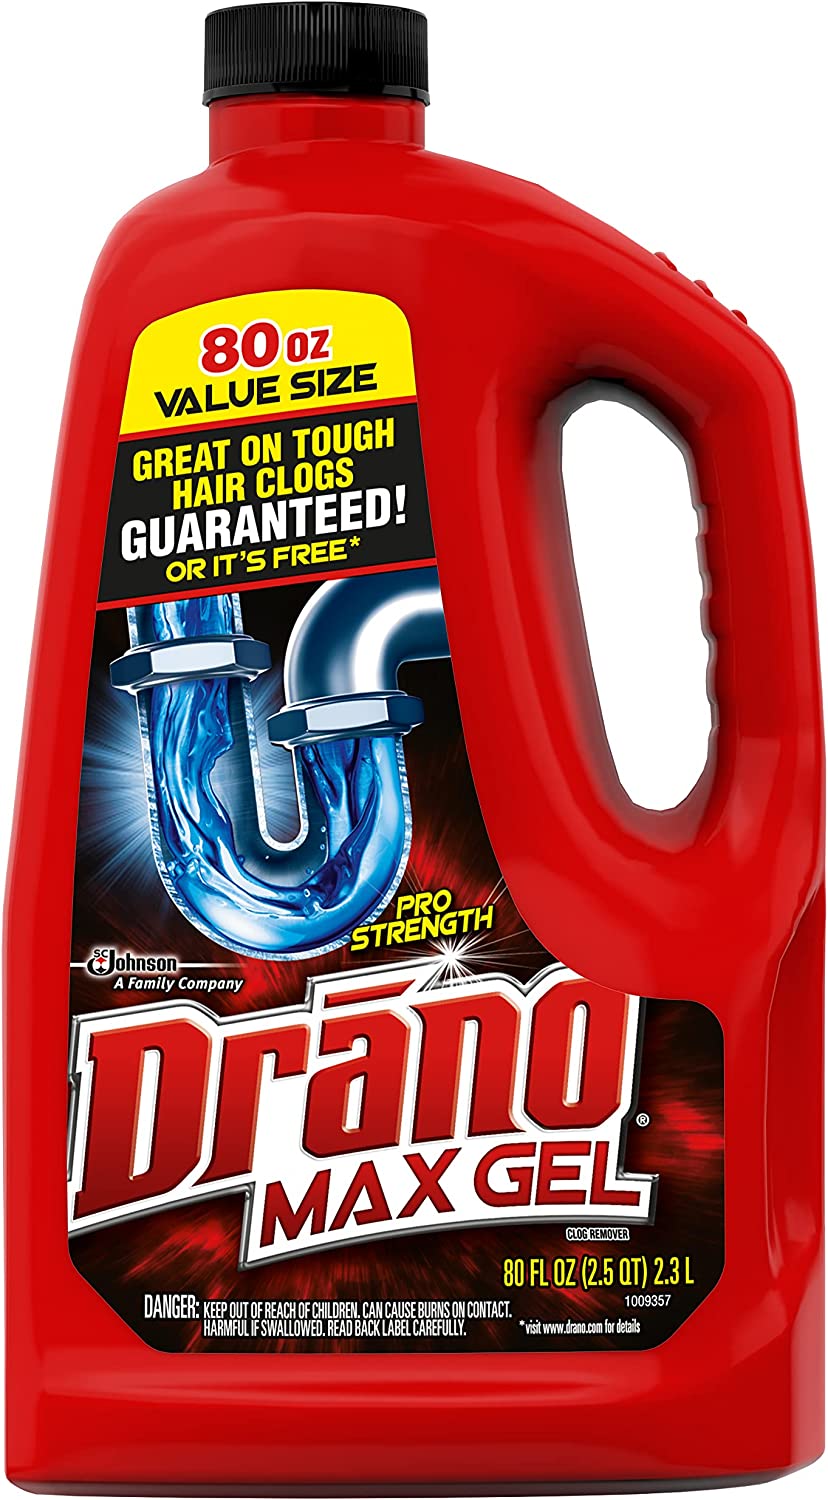 Review of Drano Max Gel Drain Clog Remover and Cleaner